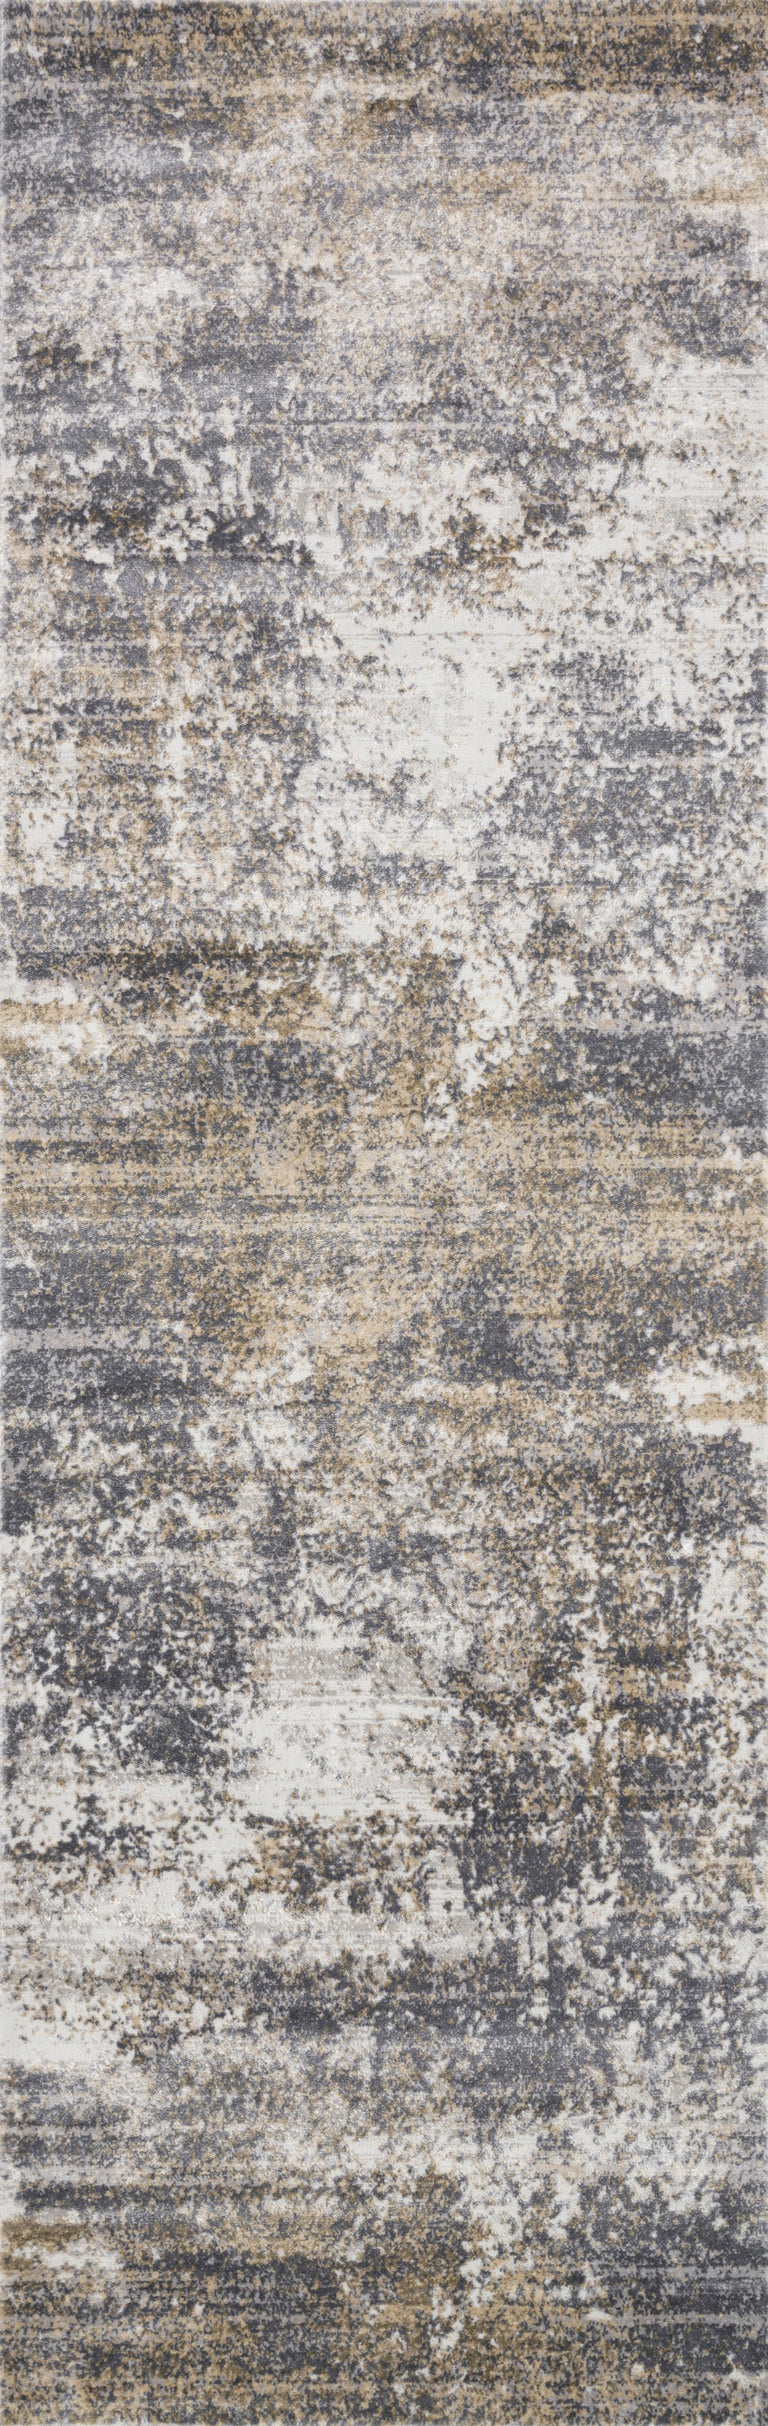 Loloi Rugs Patina Collection Rug in Granite, Stone - 6'7" x 9'2"